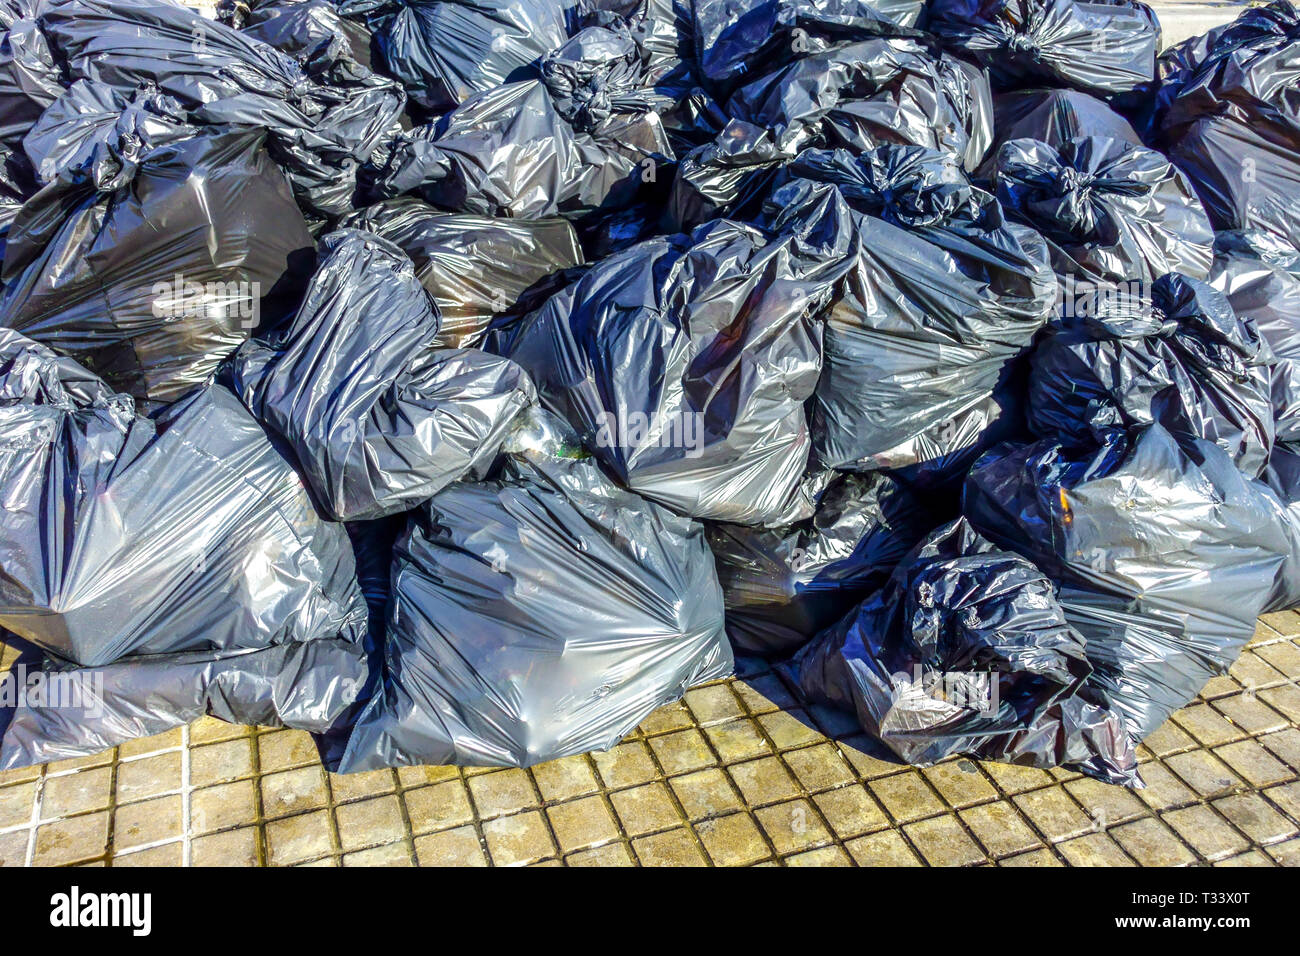 Black plastic bags filled with waste Stock Photo - Alamy